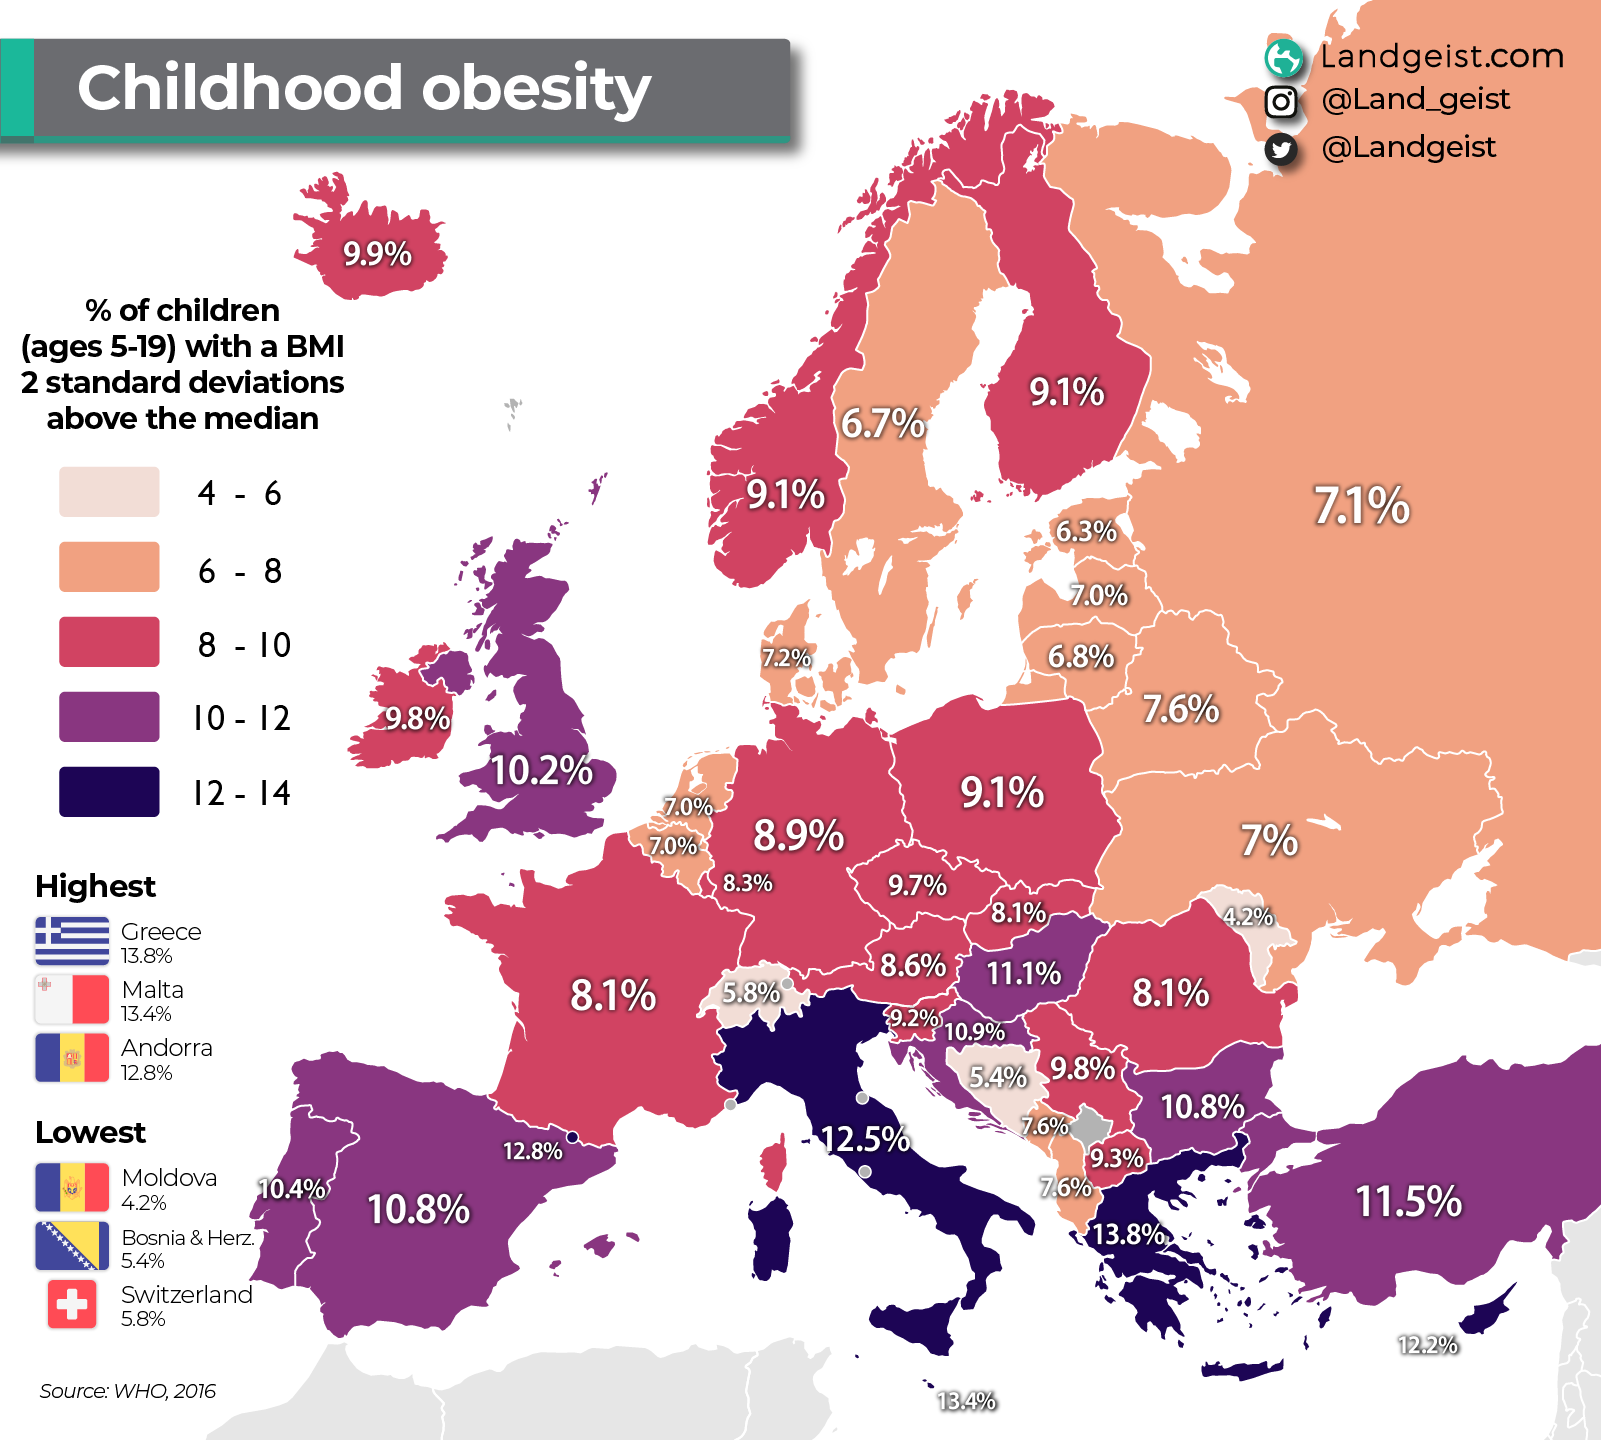 Map of the childhood obesity rate in Europe.